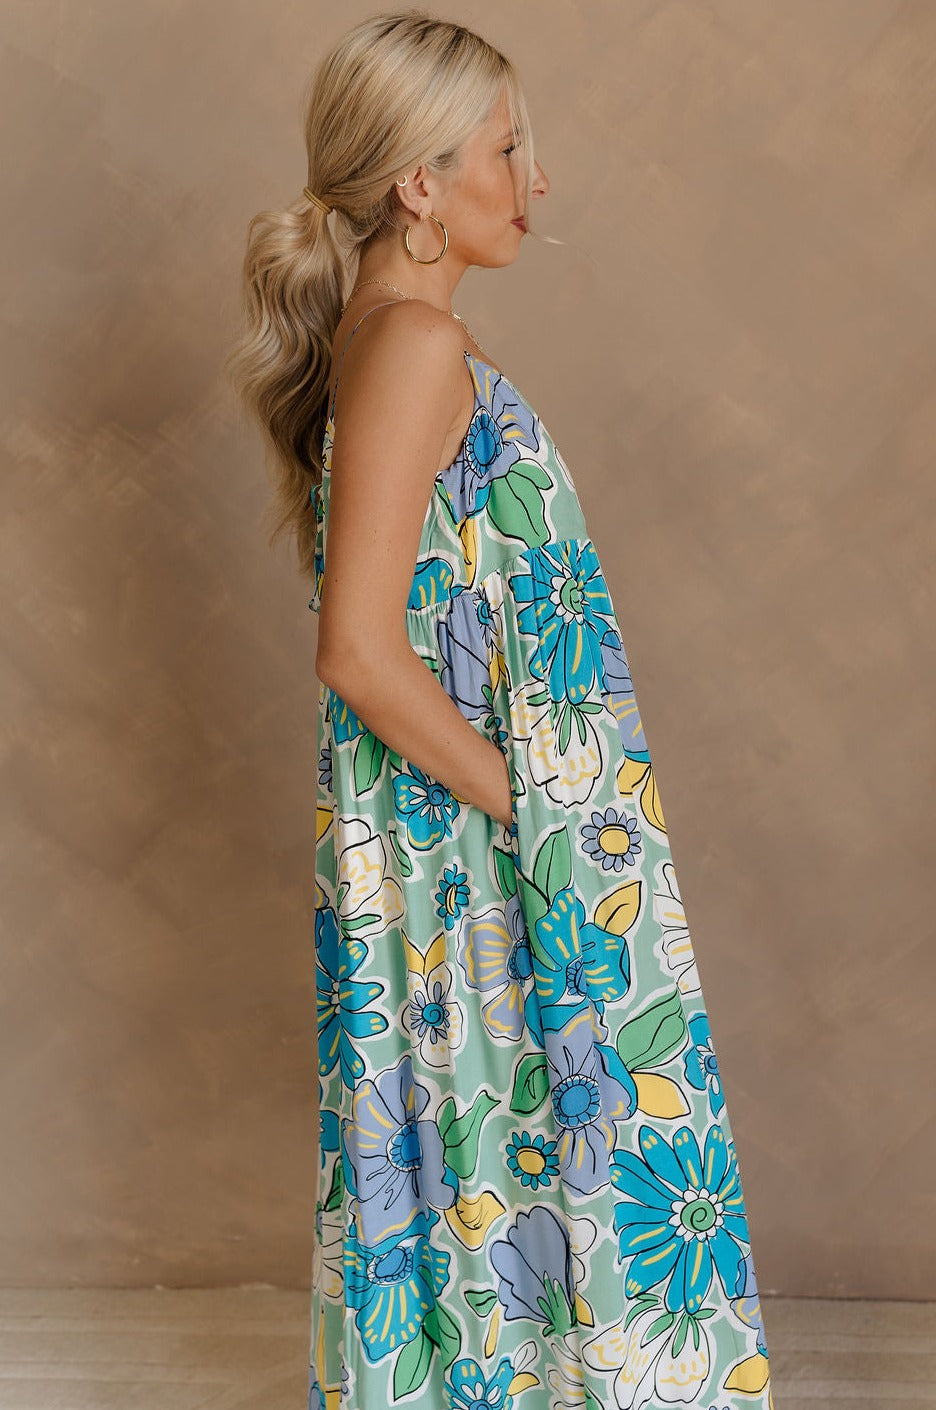 Side view of female model wearing the Mallory Green Multi Floral Sleeveless Midi Dress which features Green, blue, white, and yellow floral print, Round neckline, Adjustable straps, Keyhole back with tie closure and White lining